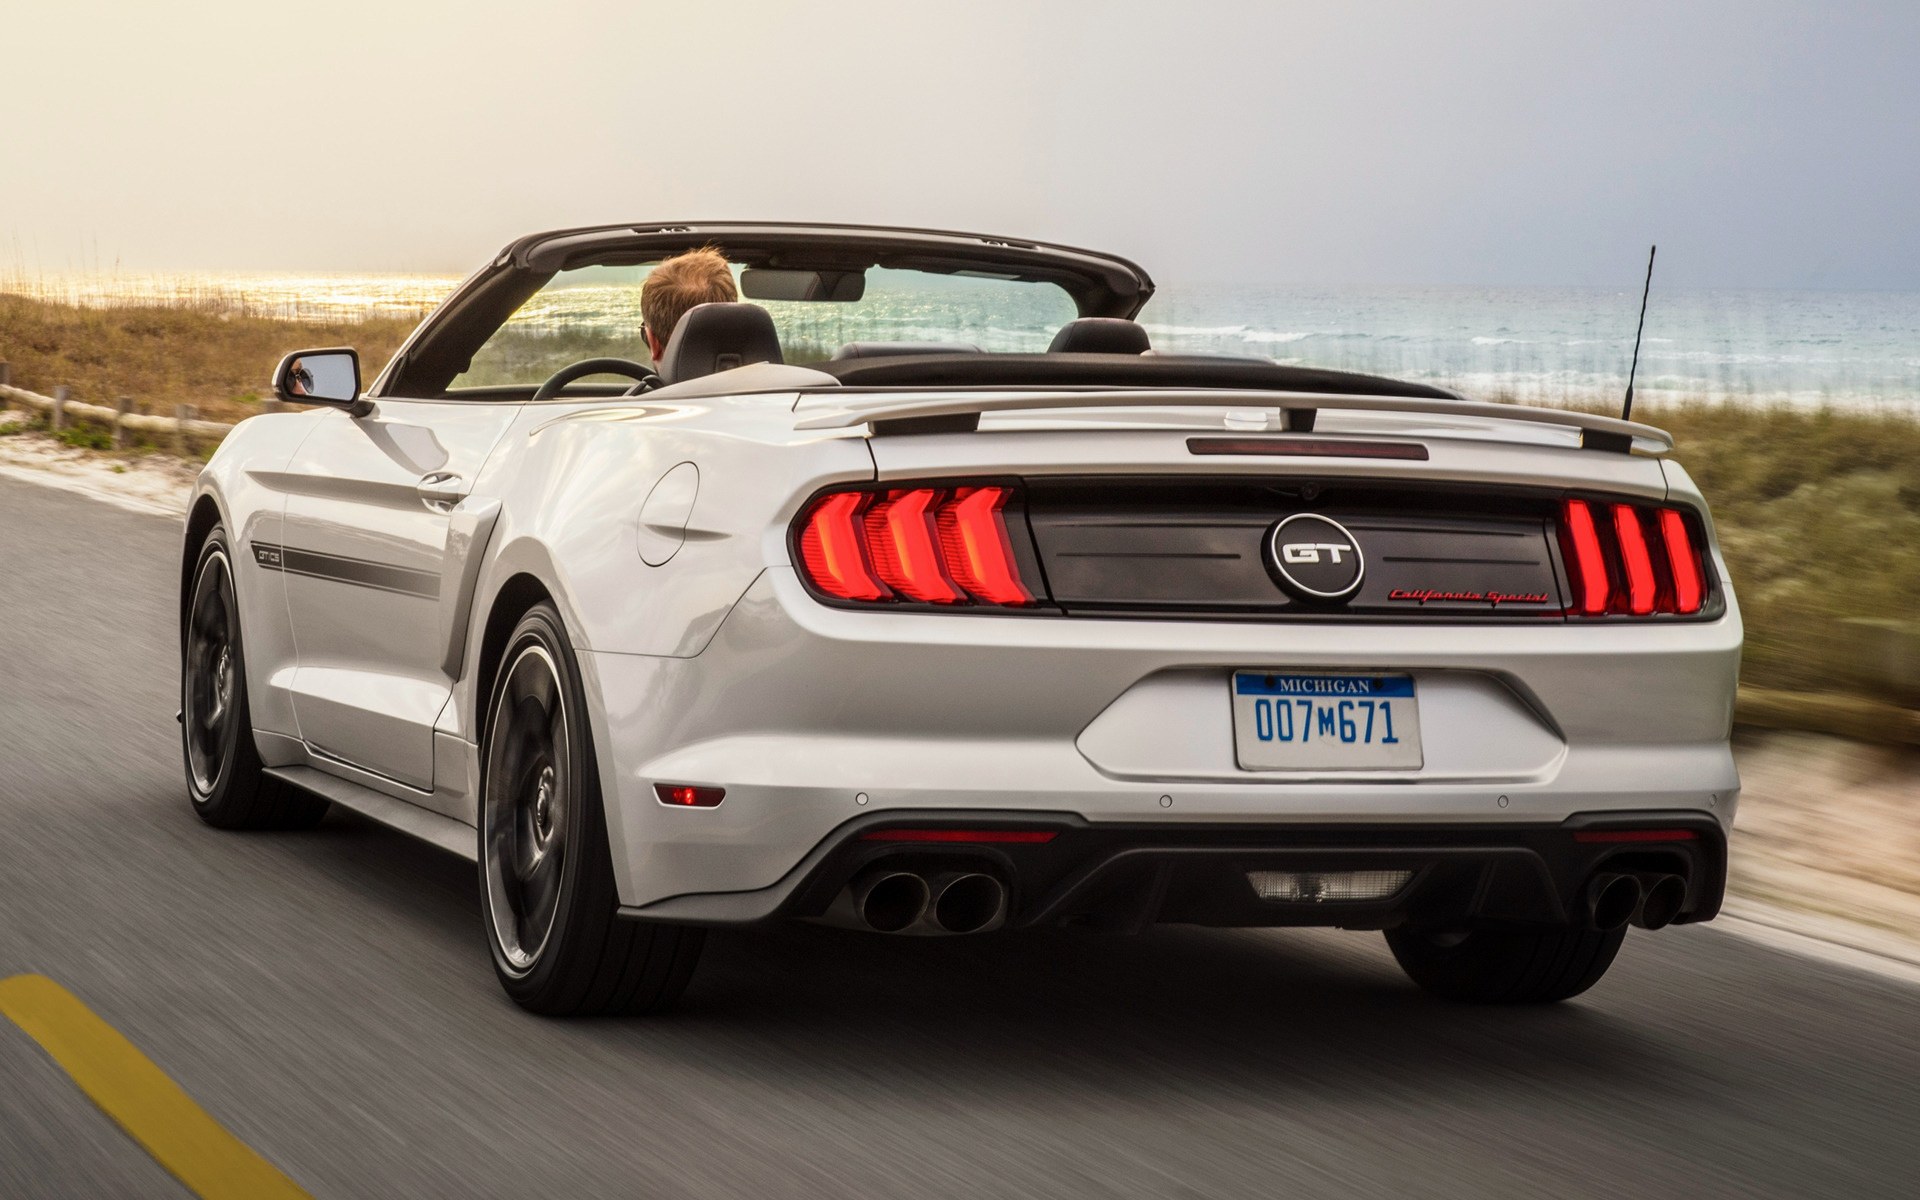 Ford Mustang GT cabrio - Ibiza Travel